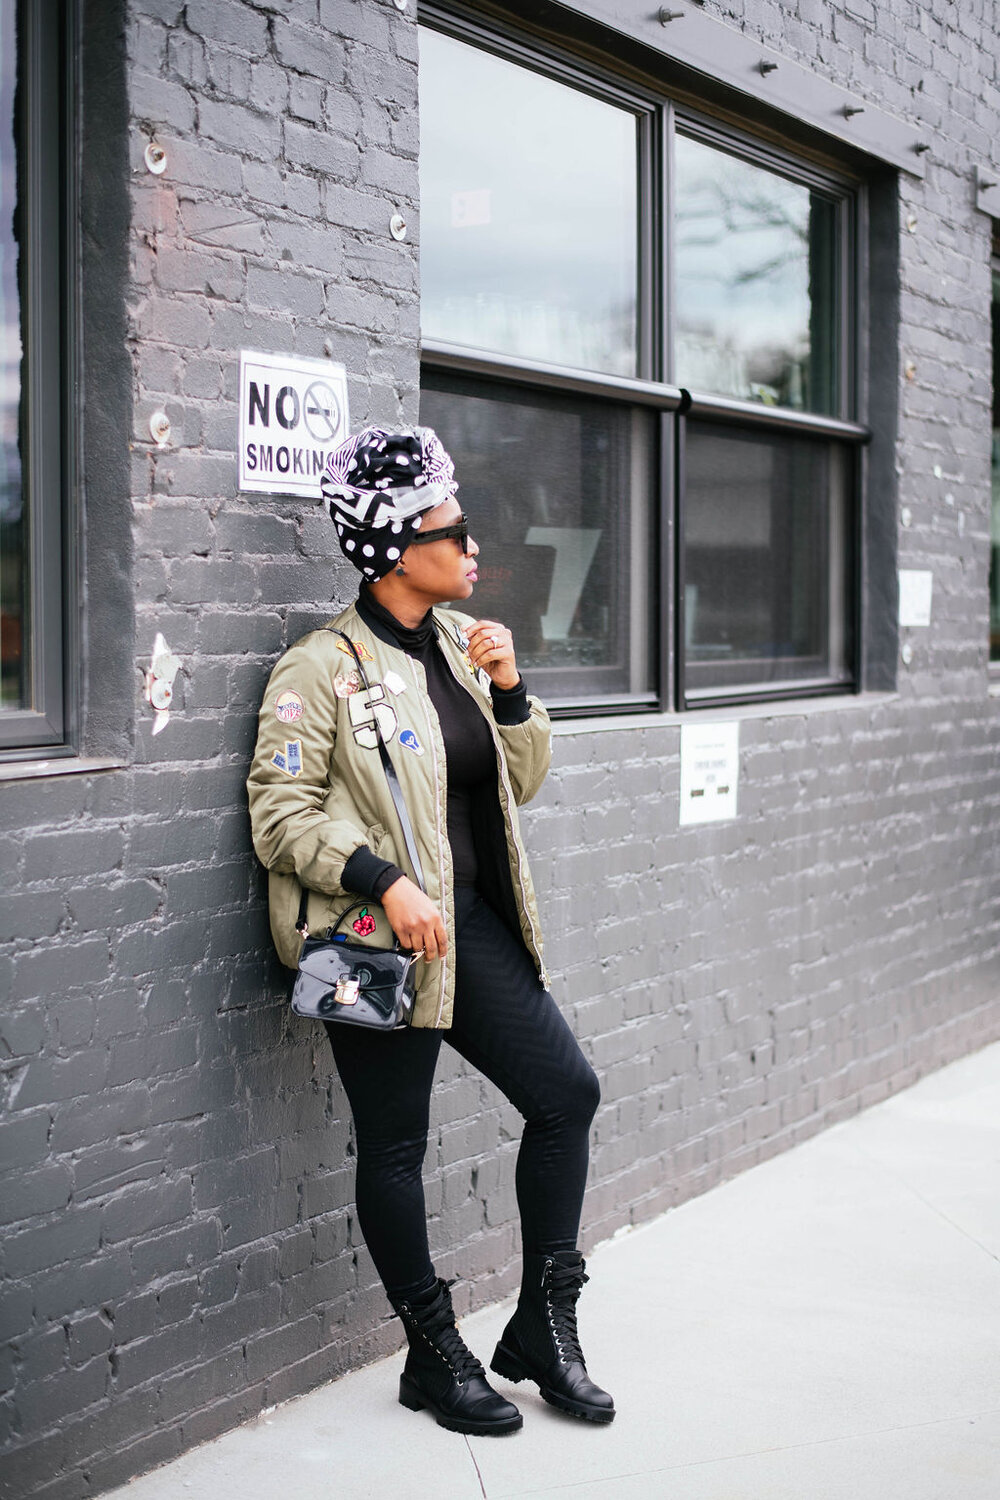 Leggings+A+Street+Style+Look+To+Copy+For+Inspo_melodiestewart.com_2.jpg